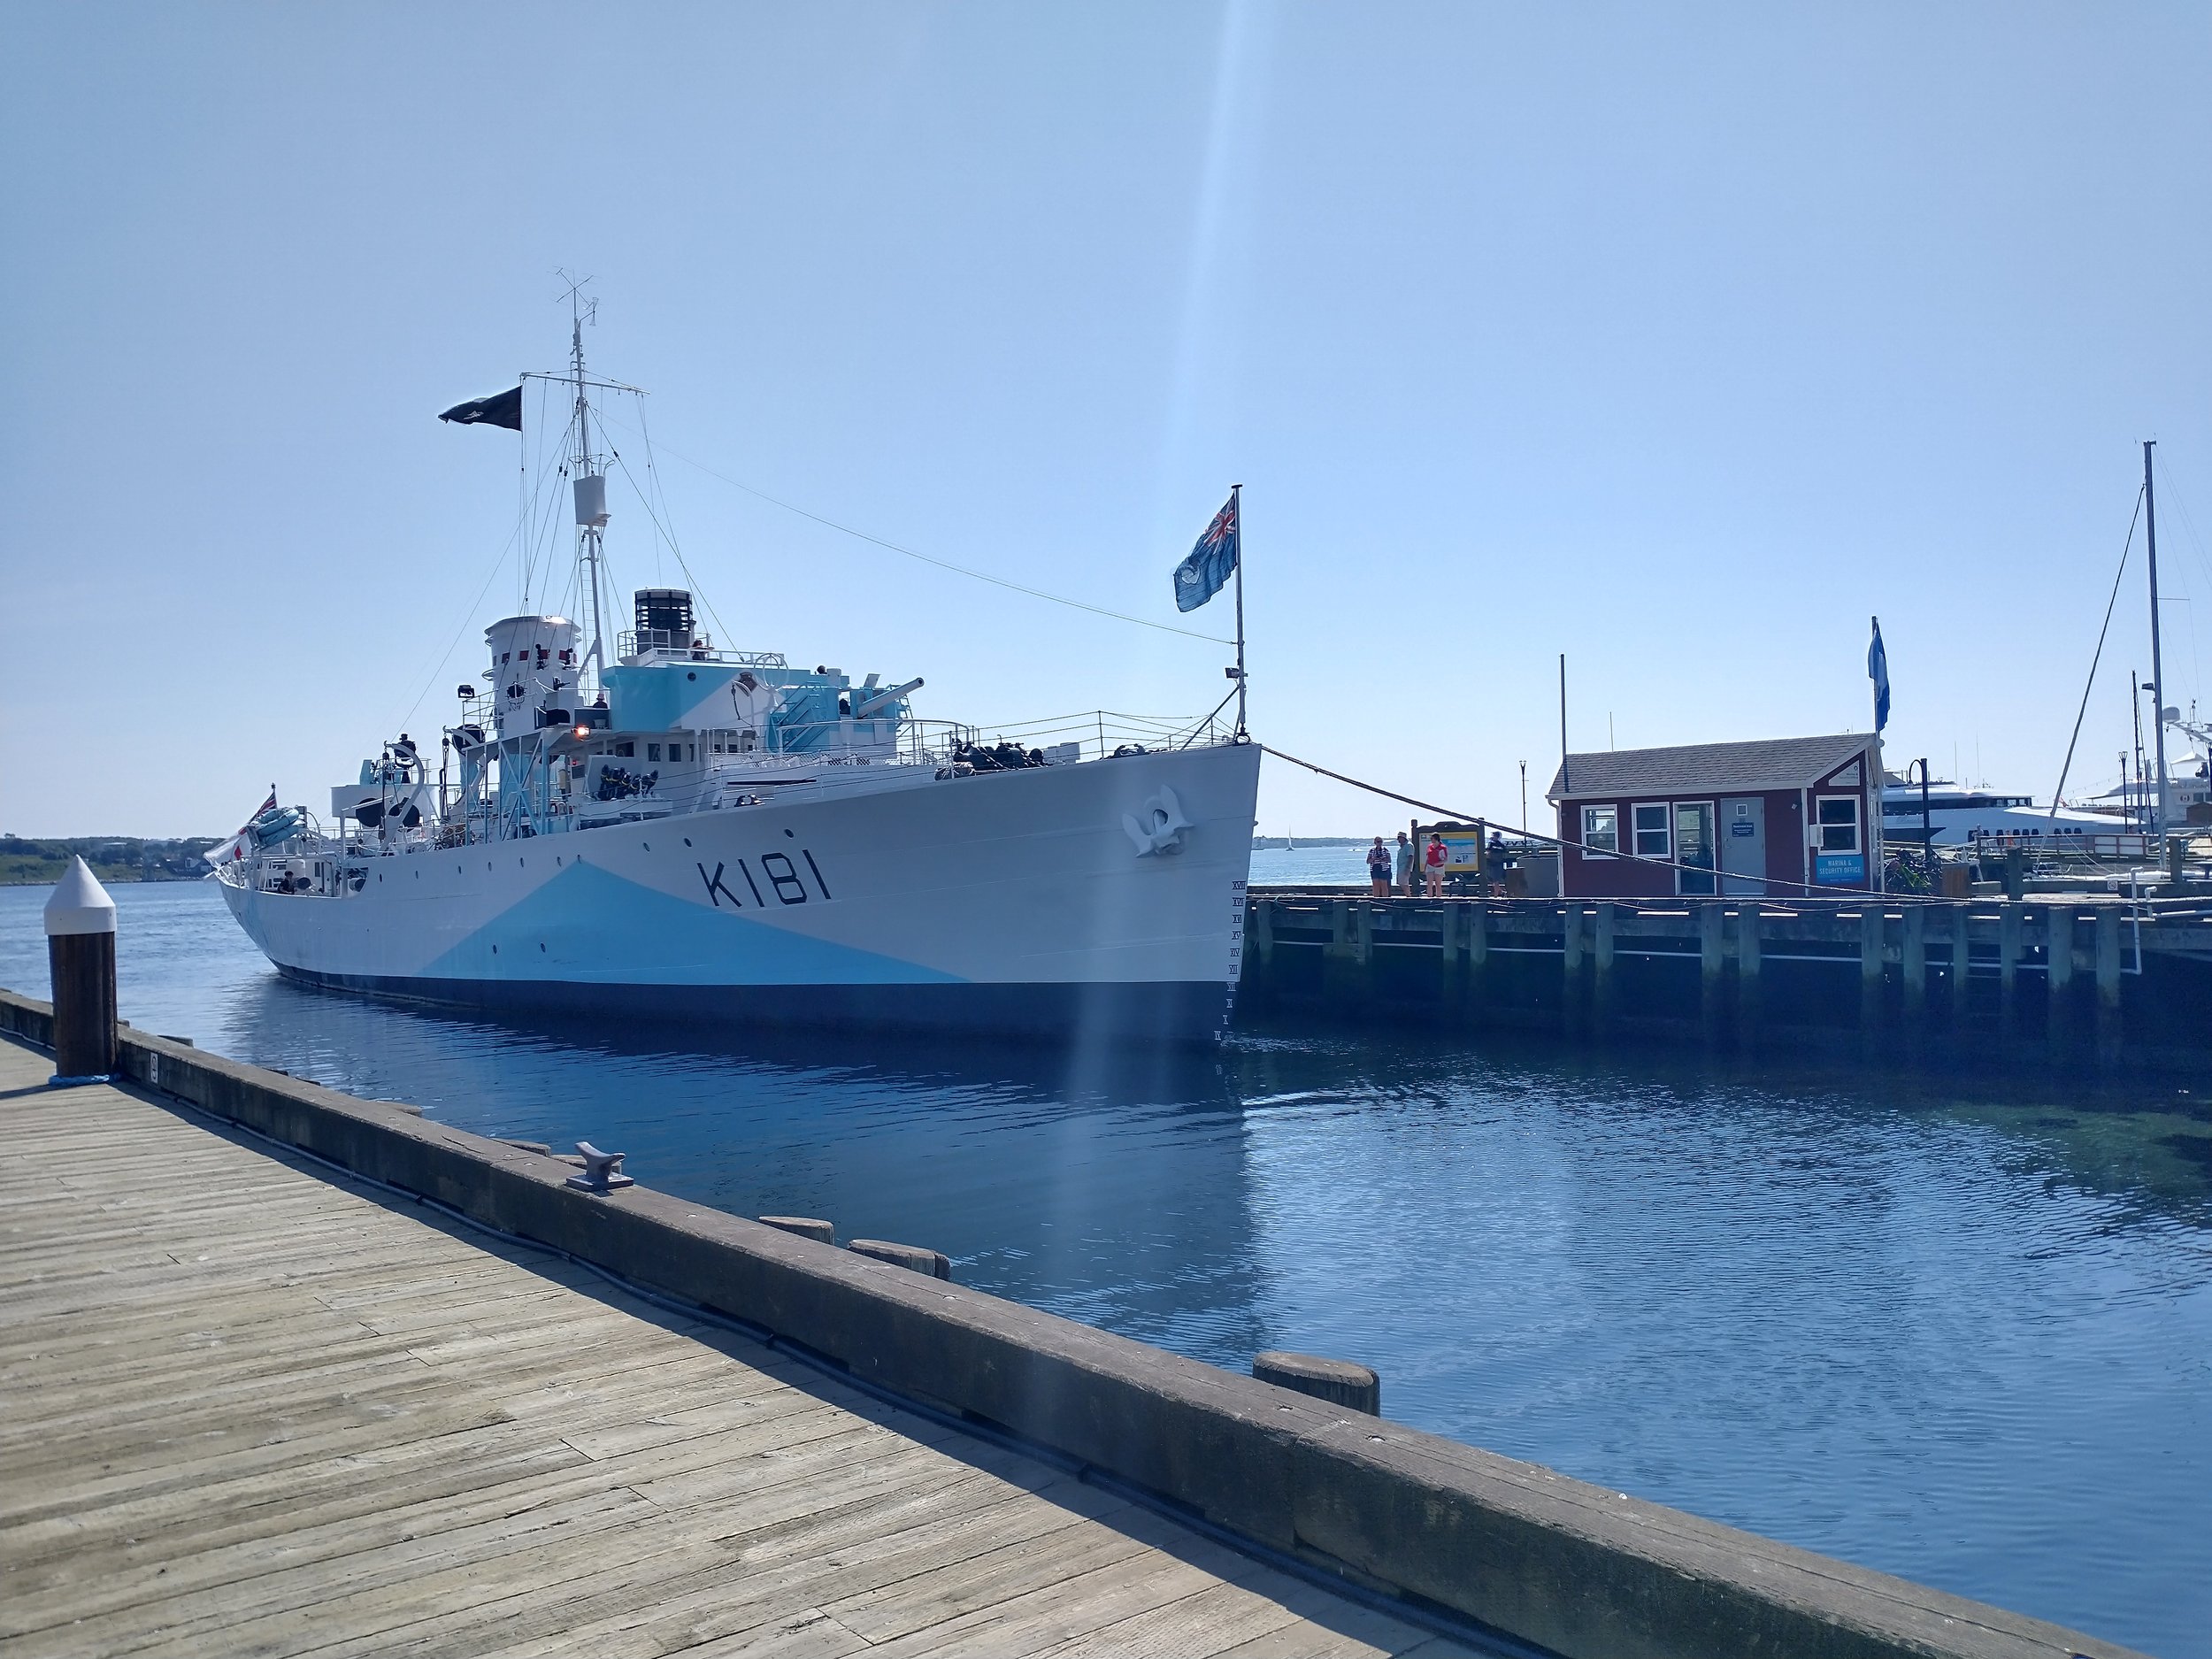 Halifax also hosts some military vessels to enforce our might over the seals.